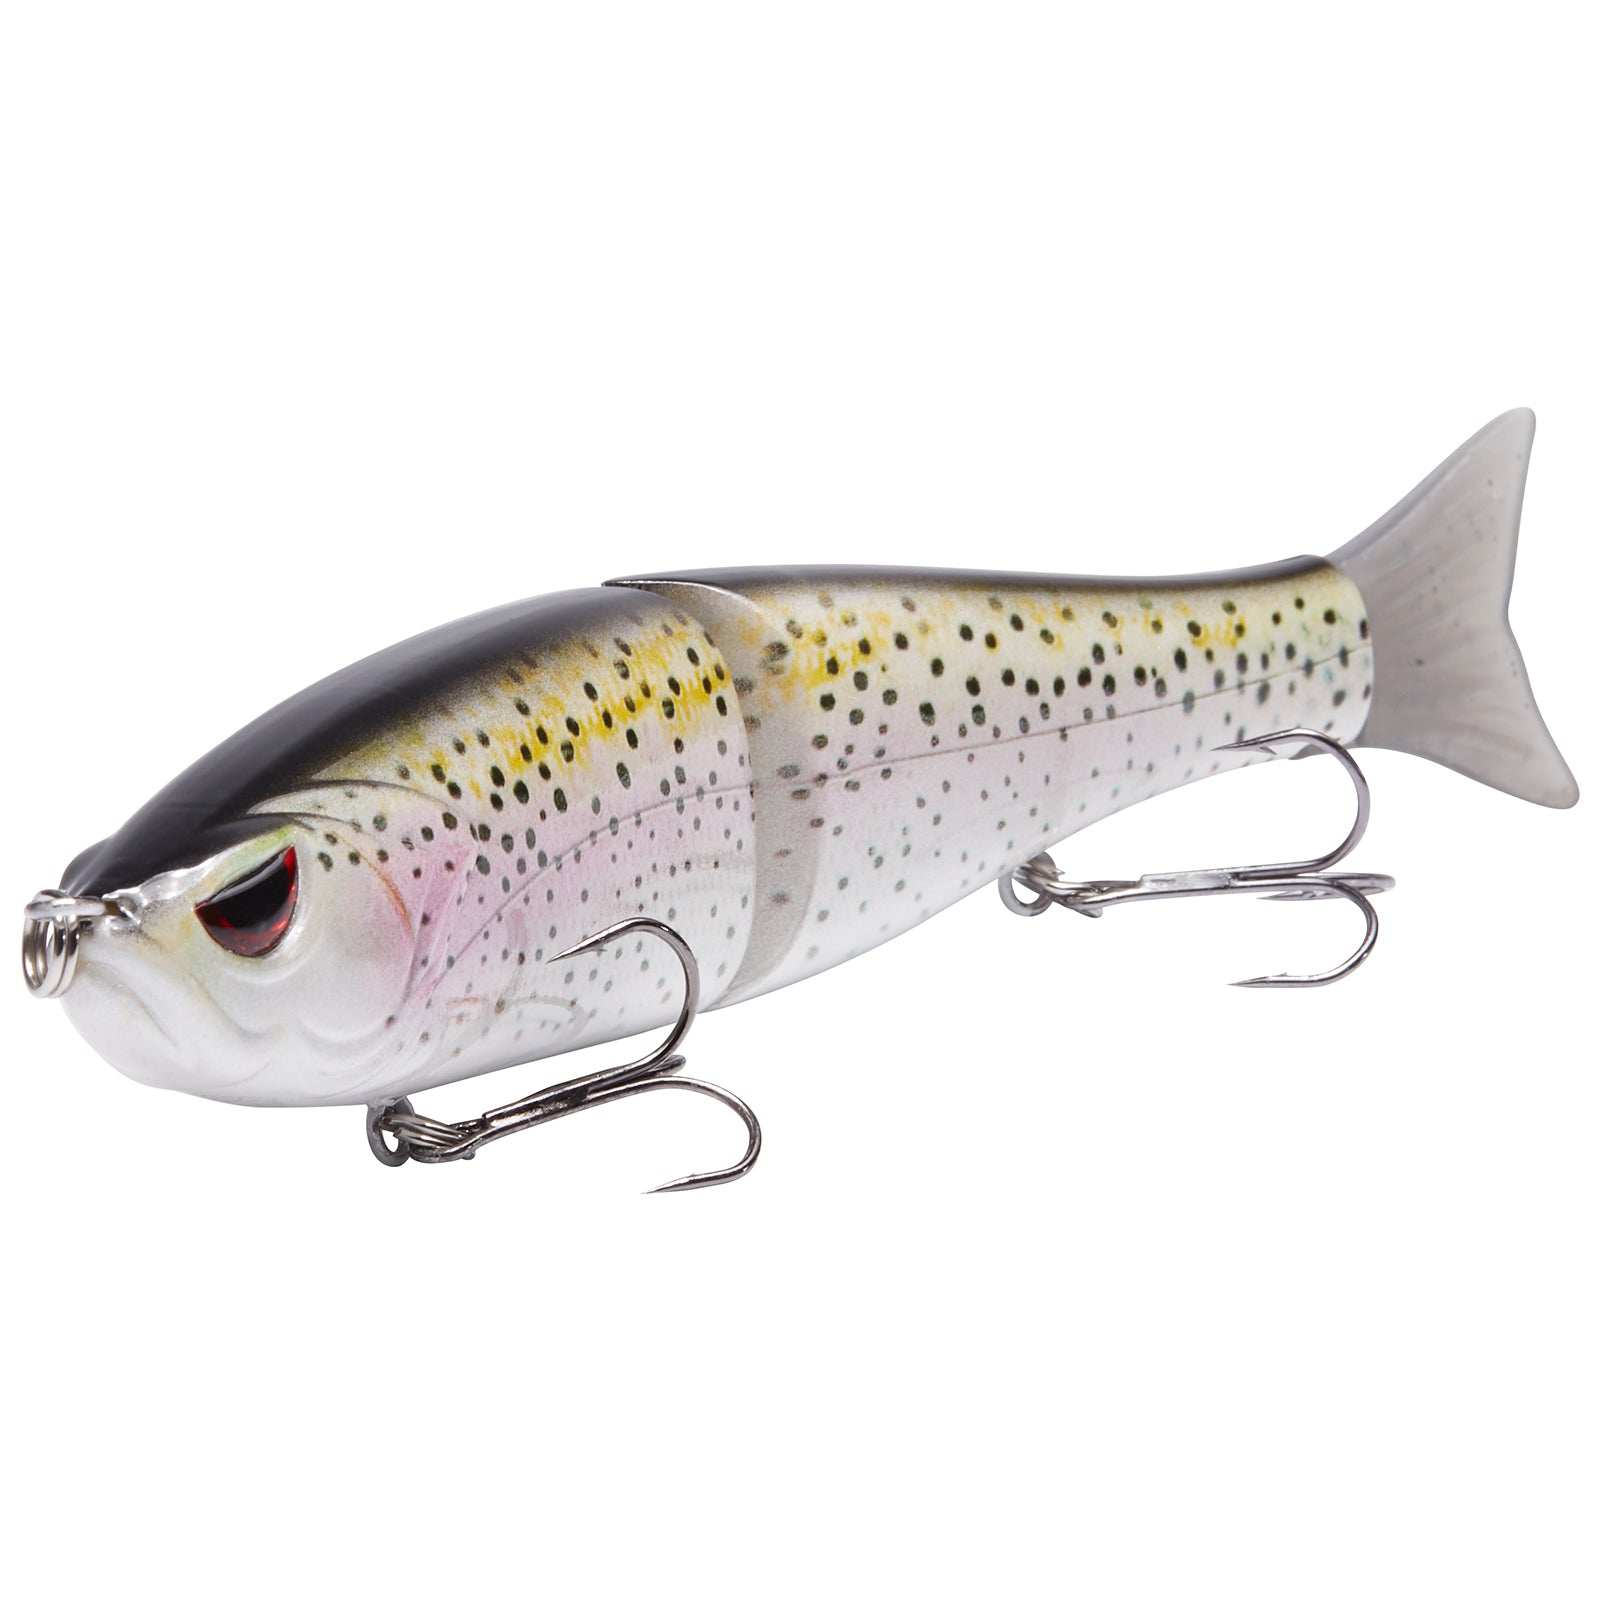 Jointed Bait 165mm 60g Shad Glider Swimbait Fishing Lures Hard Body  Floating Bass Pike Tackle 231229 From Heng05, $9.24